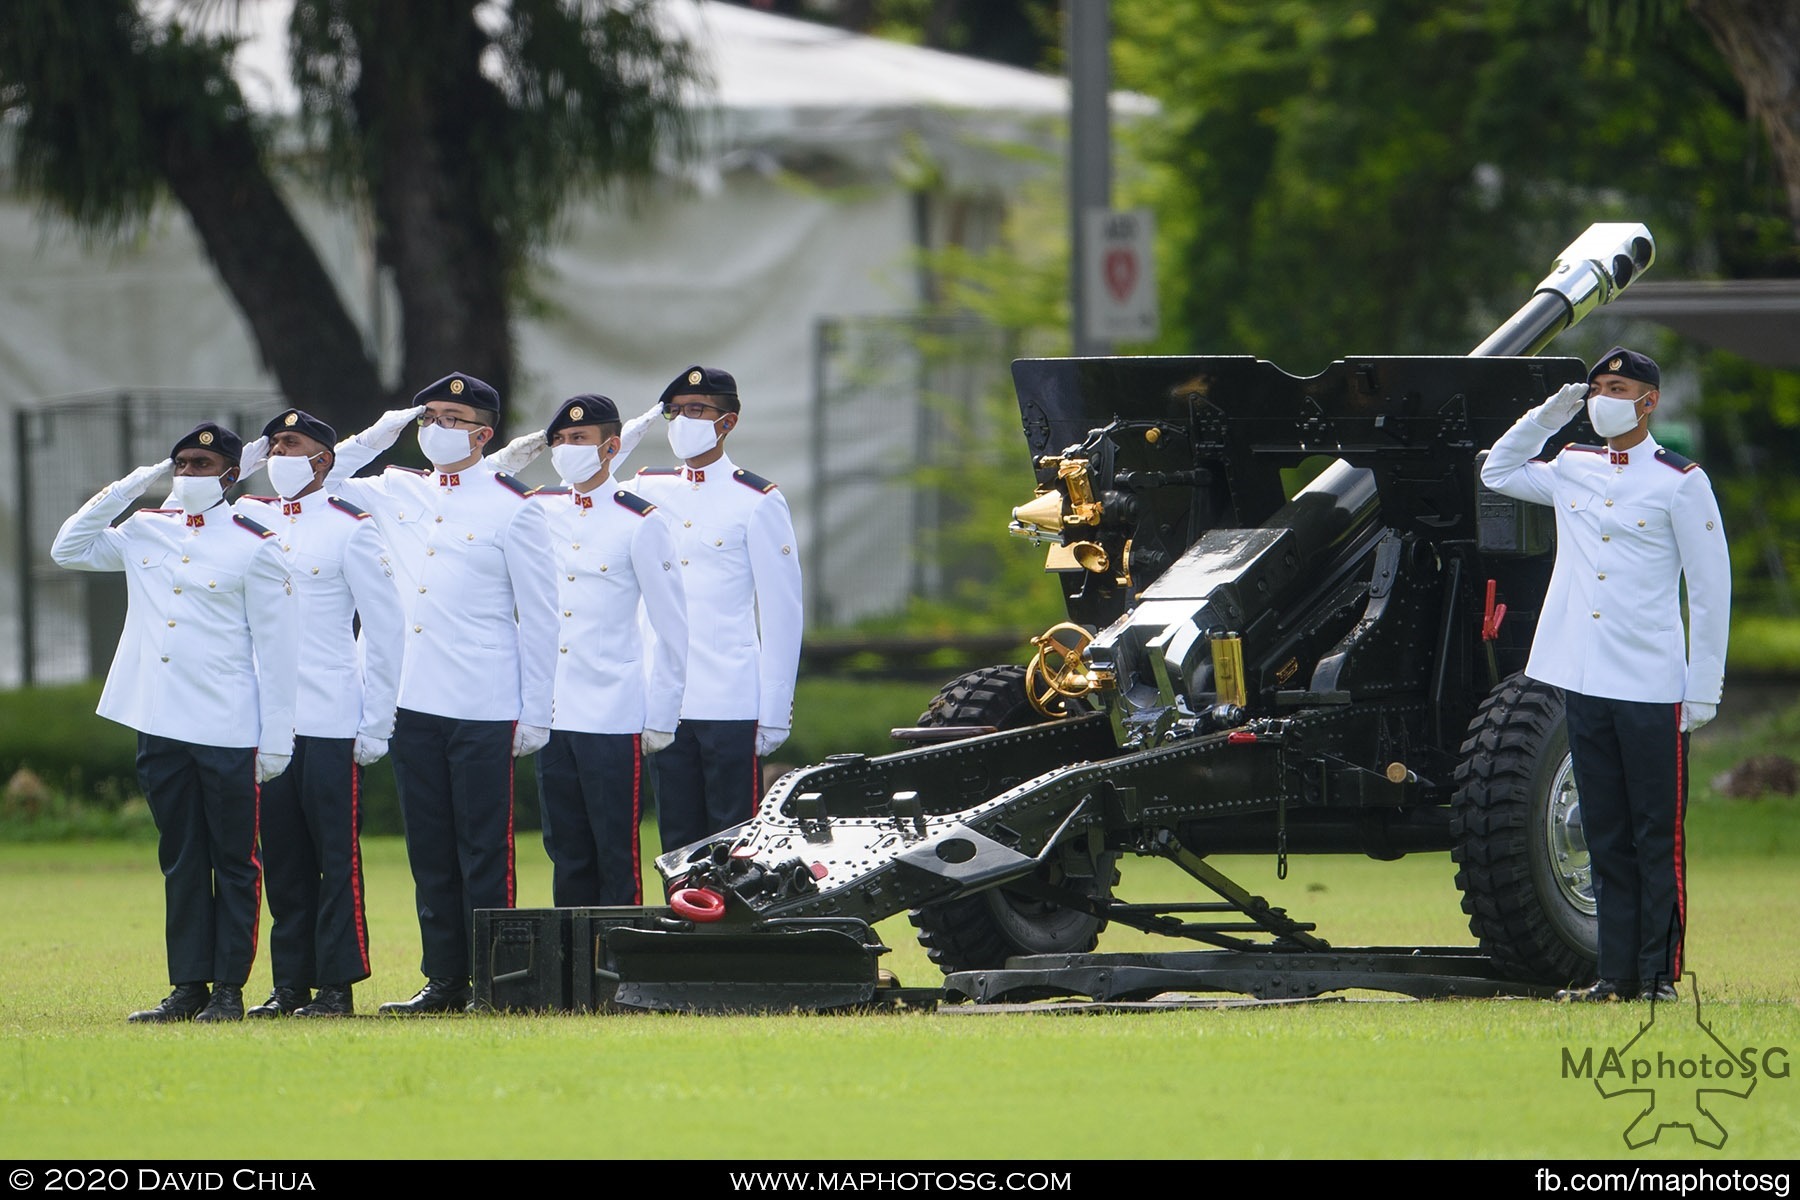 A gunner crew from the Presidential 21-Gun Salute salutes our Frontline Fighters during the Parade@Padang.